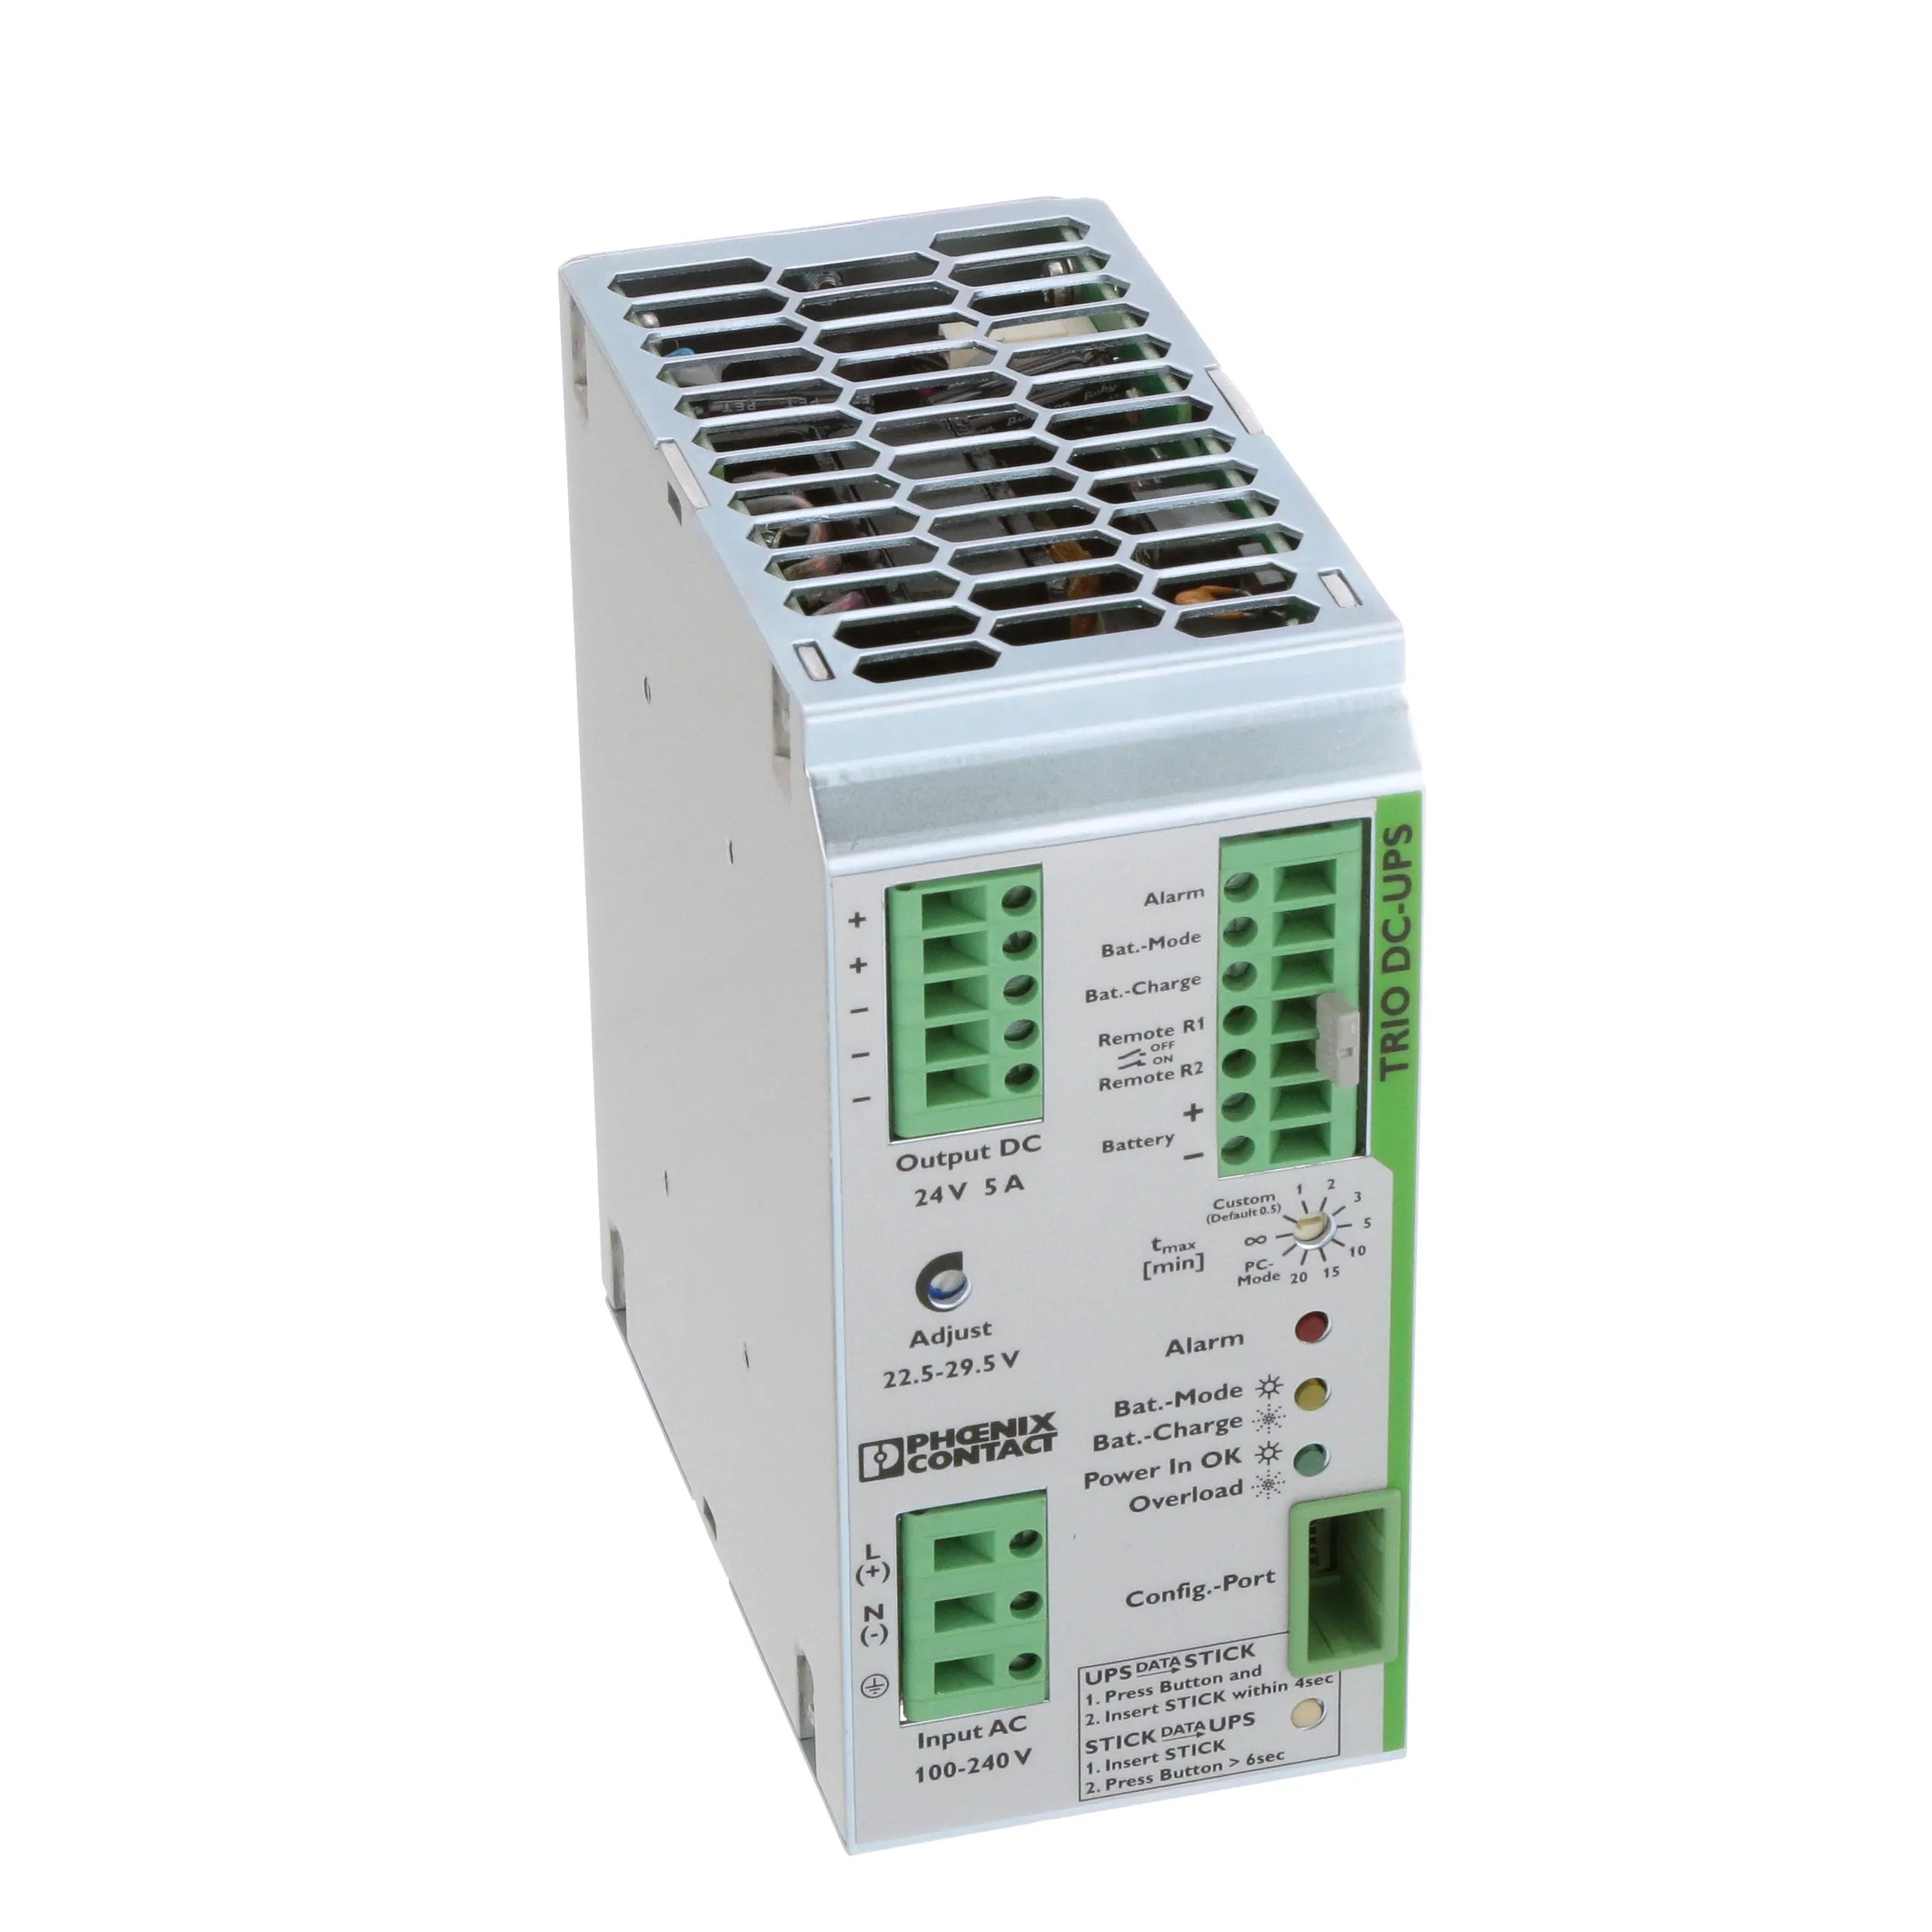 2866611 | PHOENIX CONTACT Power Supply, Integrated Battery, 24 VDC, 5A Out, 100-240 VAC/DC Supply